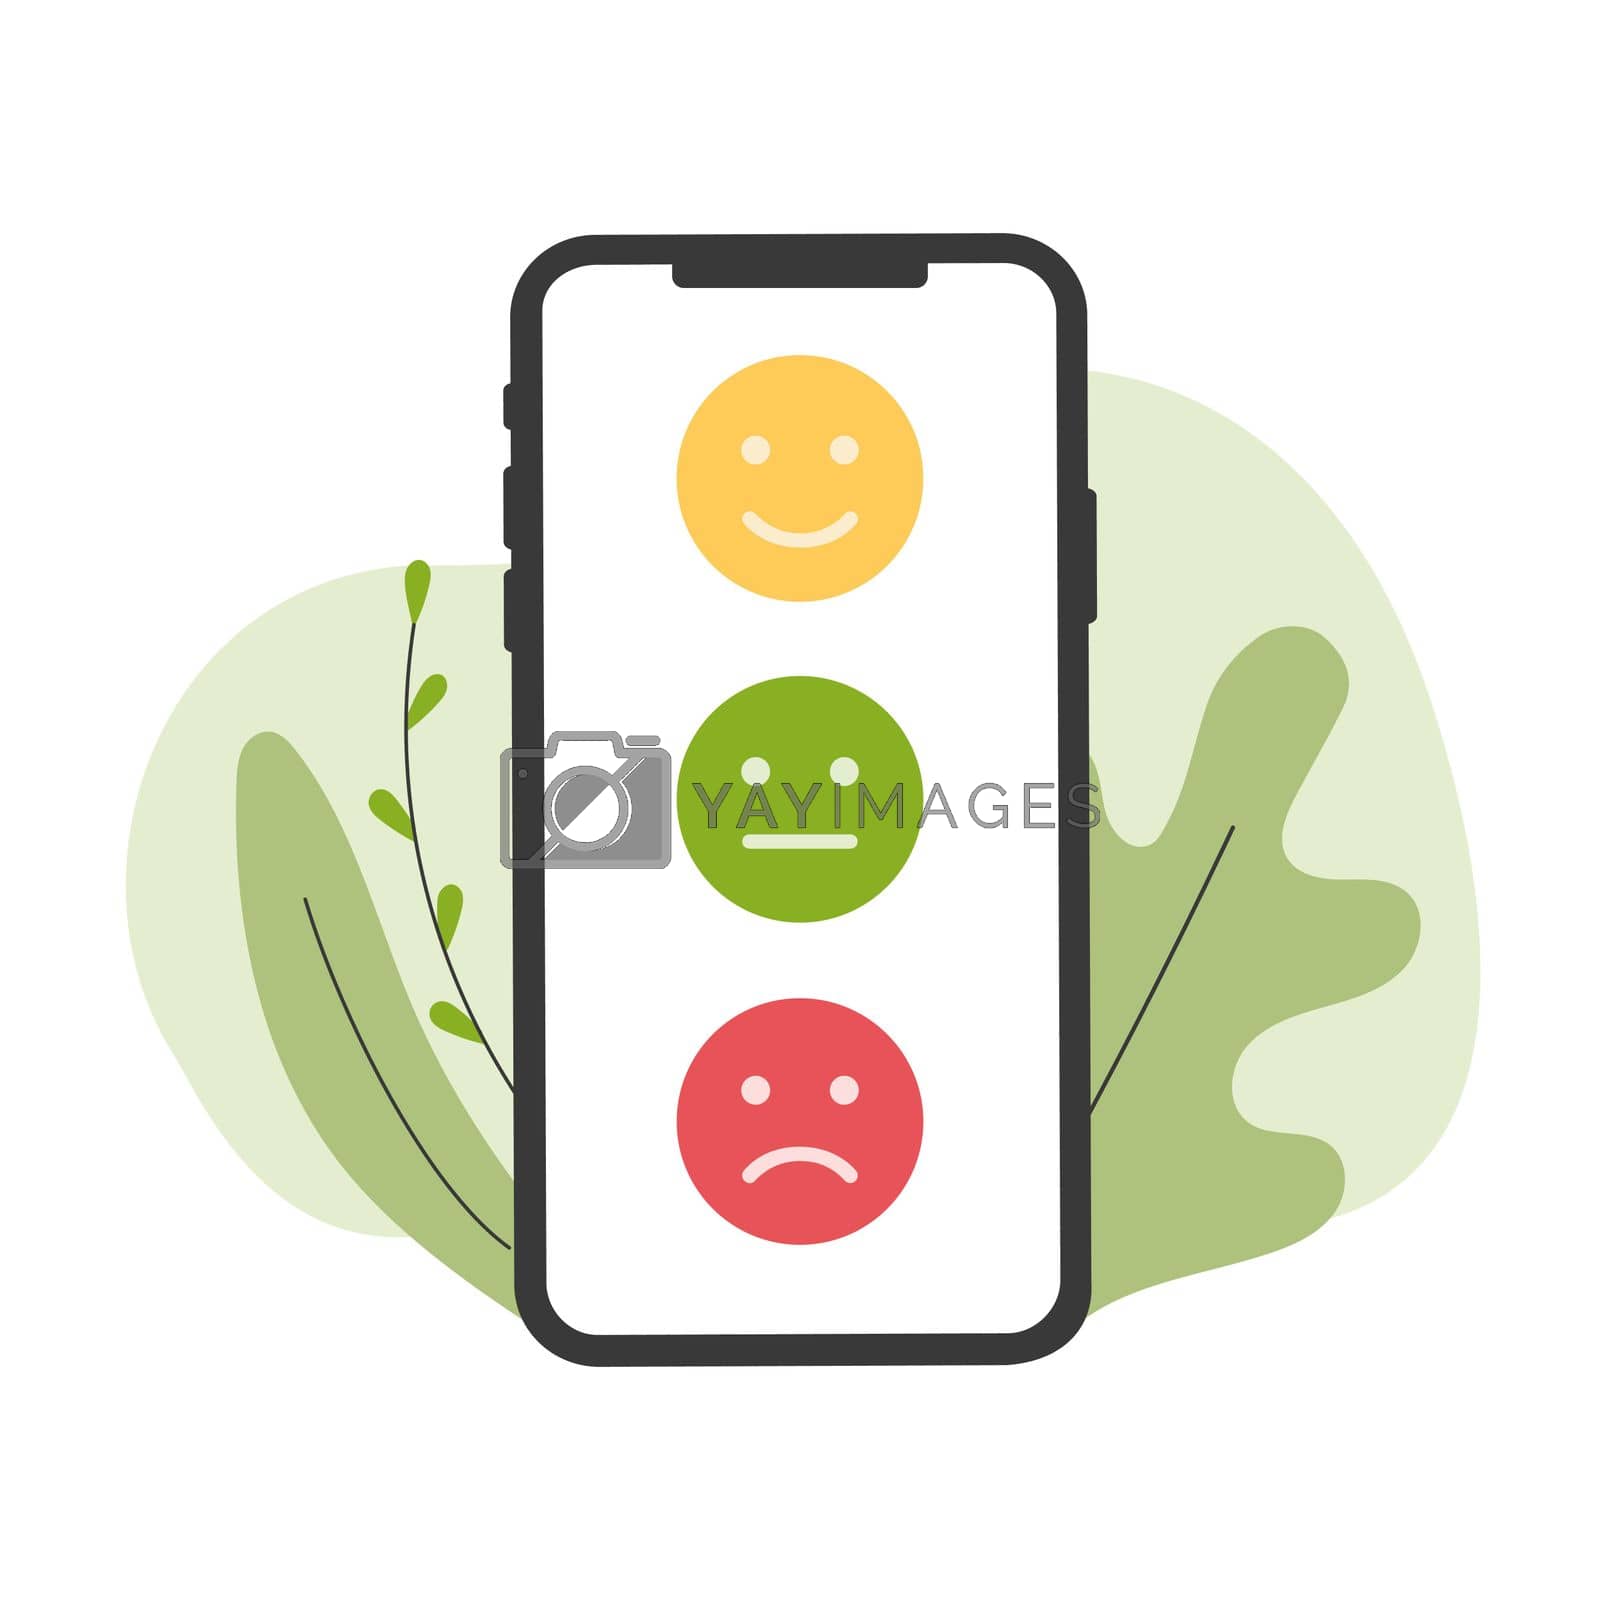 Royalty free image of Feedback emotion scale on phone. Reviews with good and bad rating. Feedback in the form of emotions. Vector flat illustration by Anastasiia